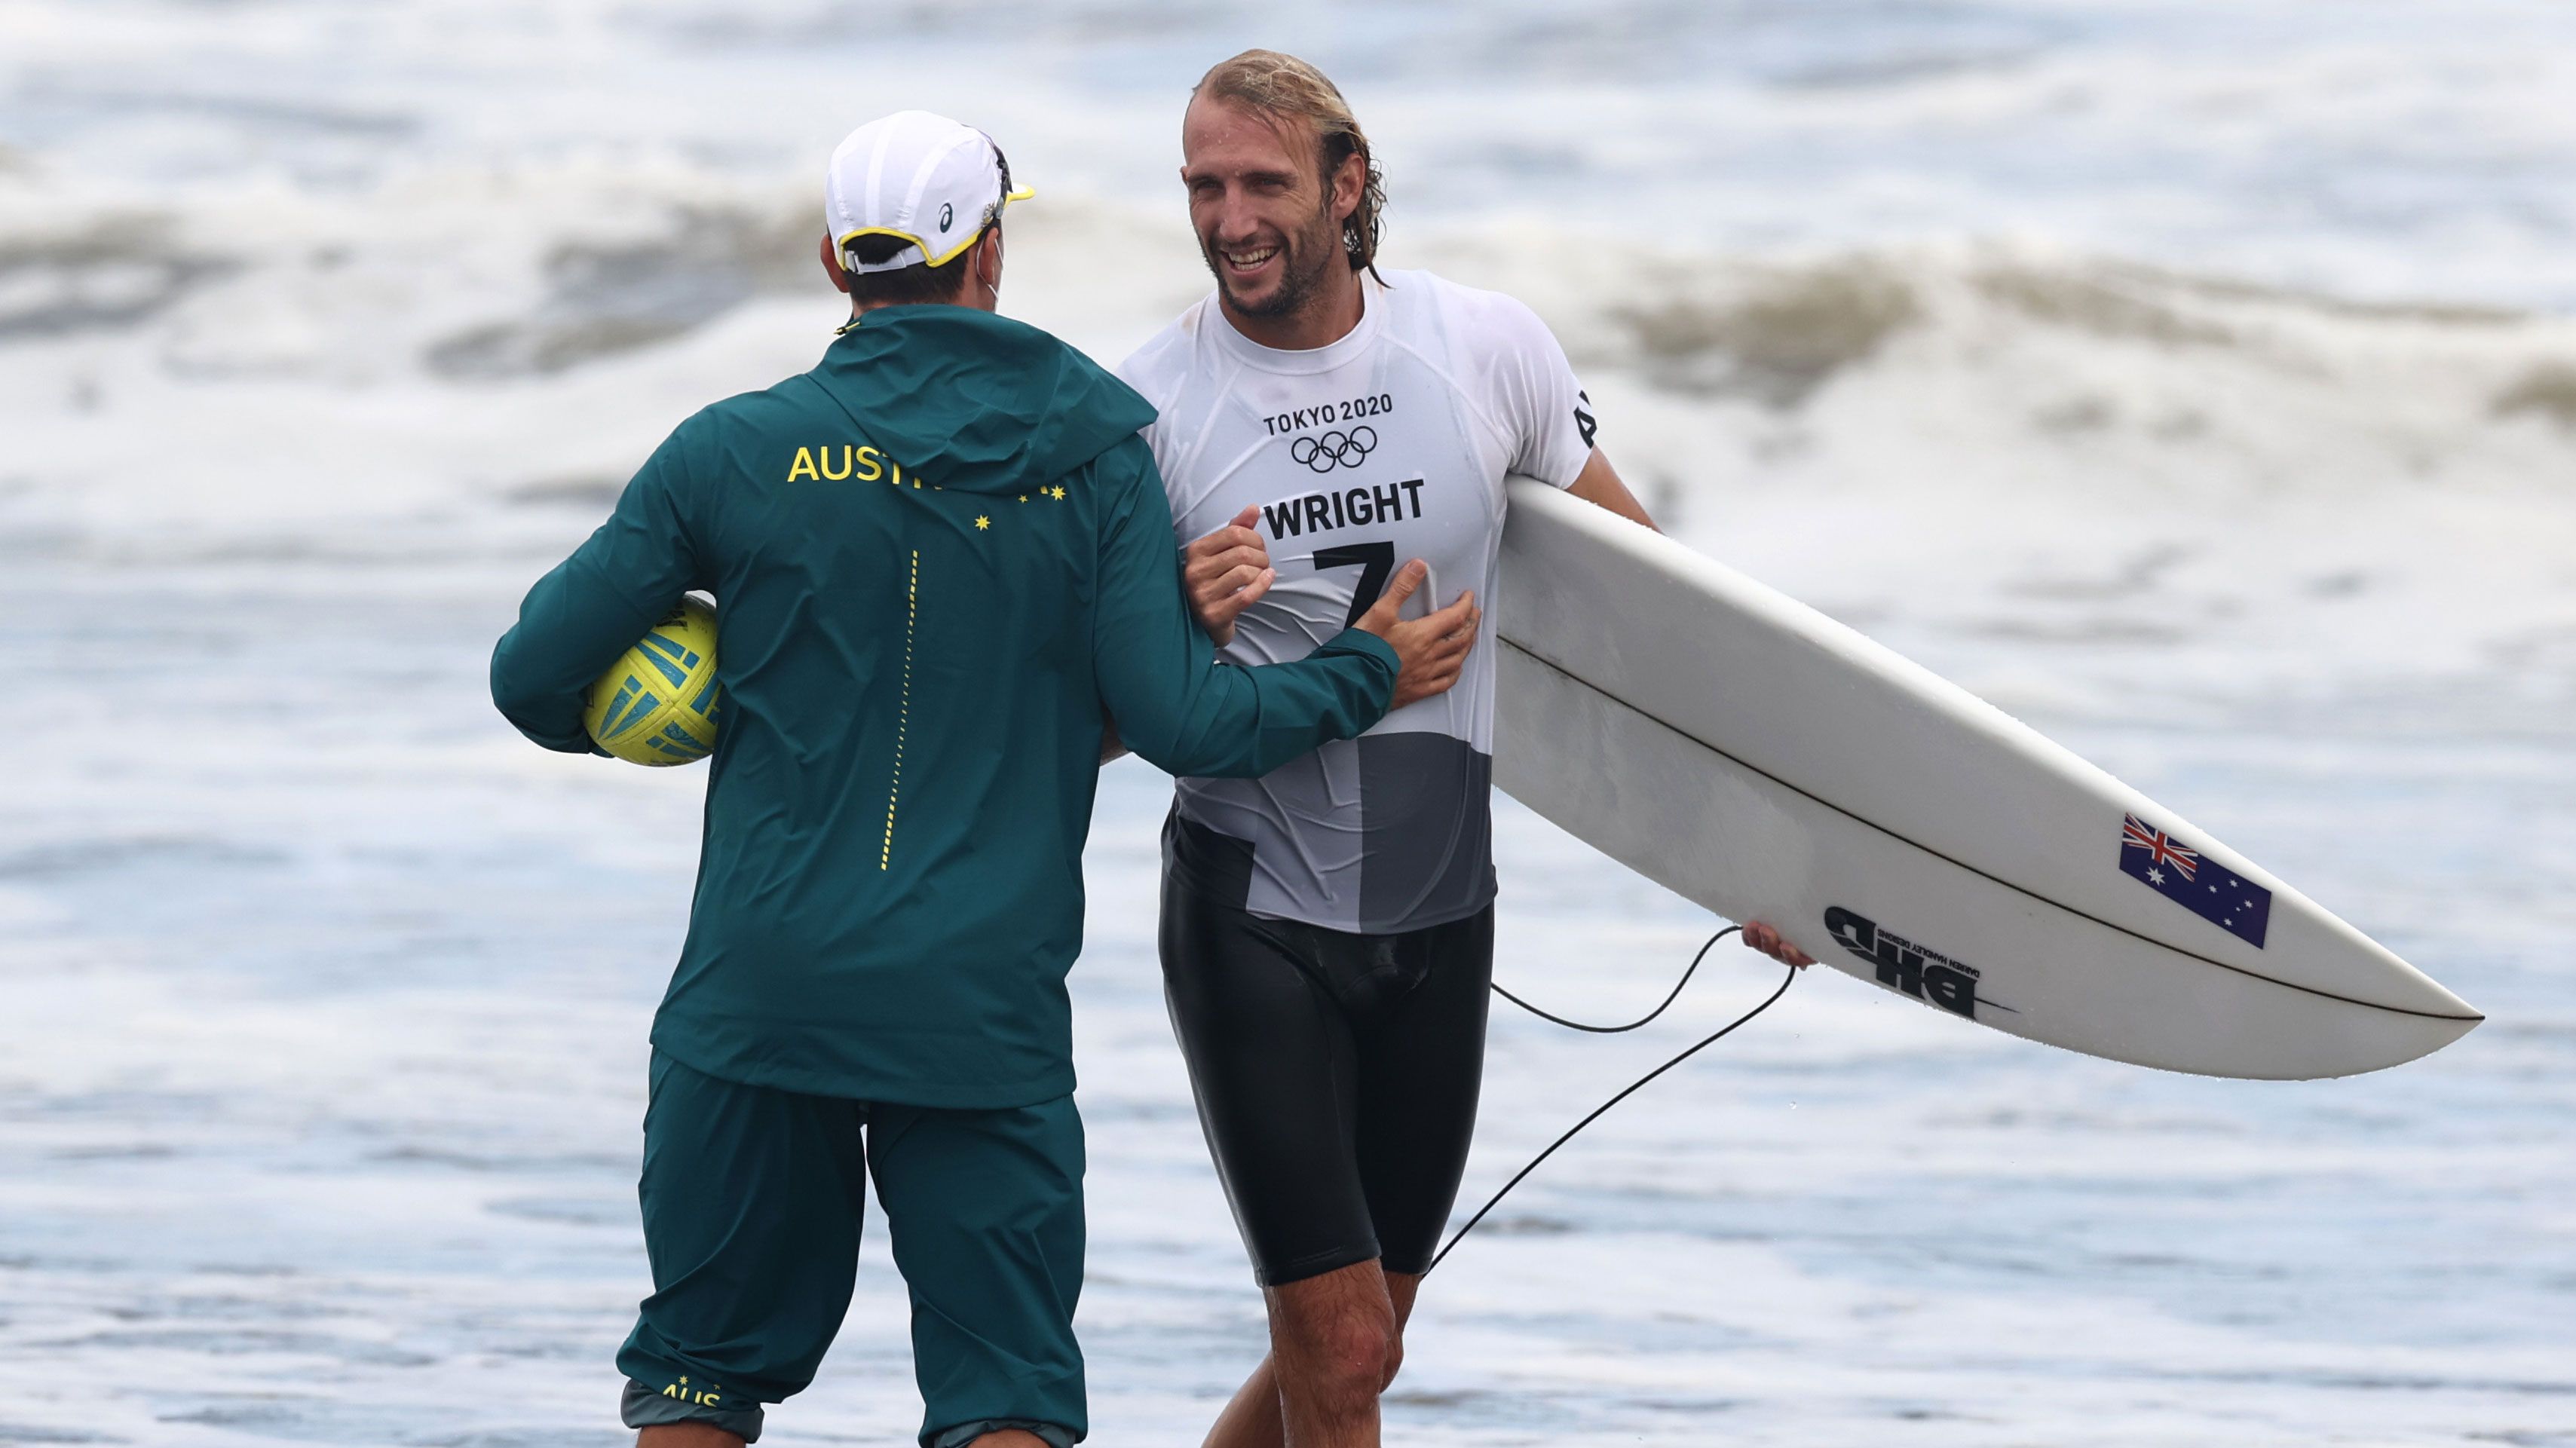 Owen Wright celebrates a victory in the Olympics surfing competition.